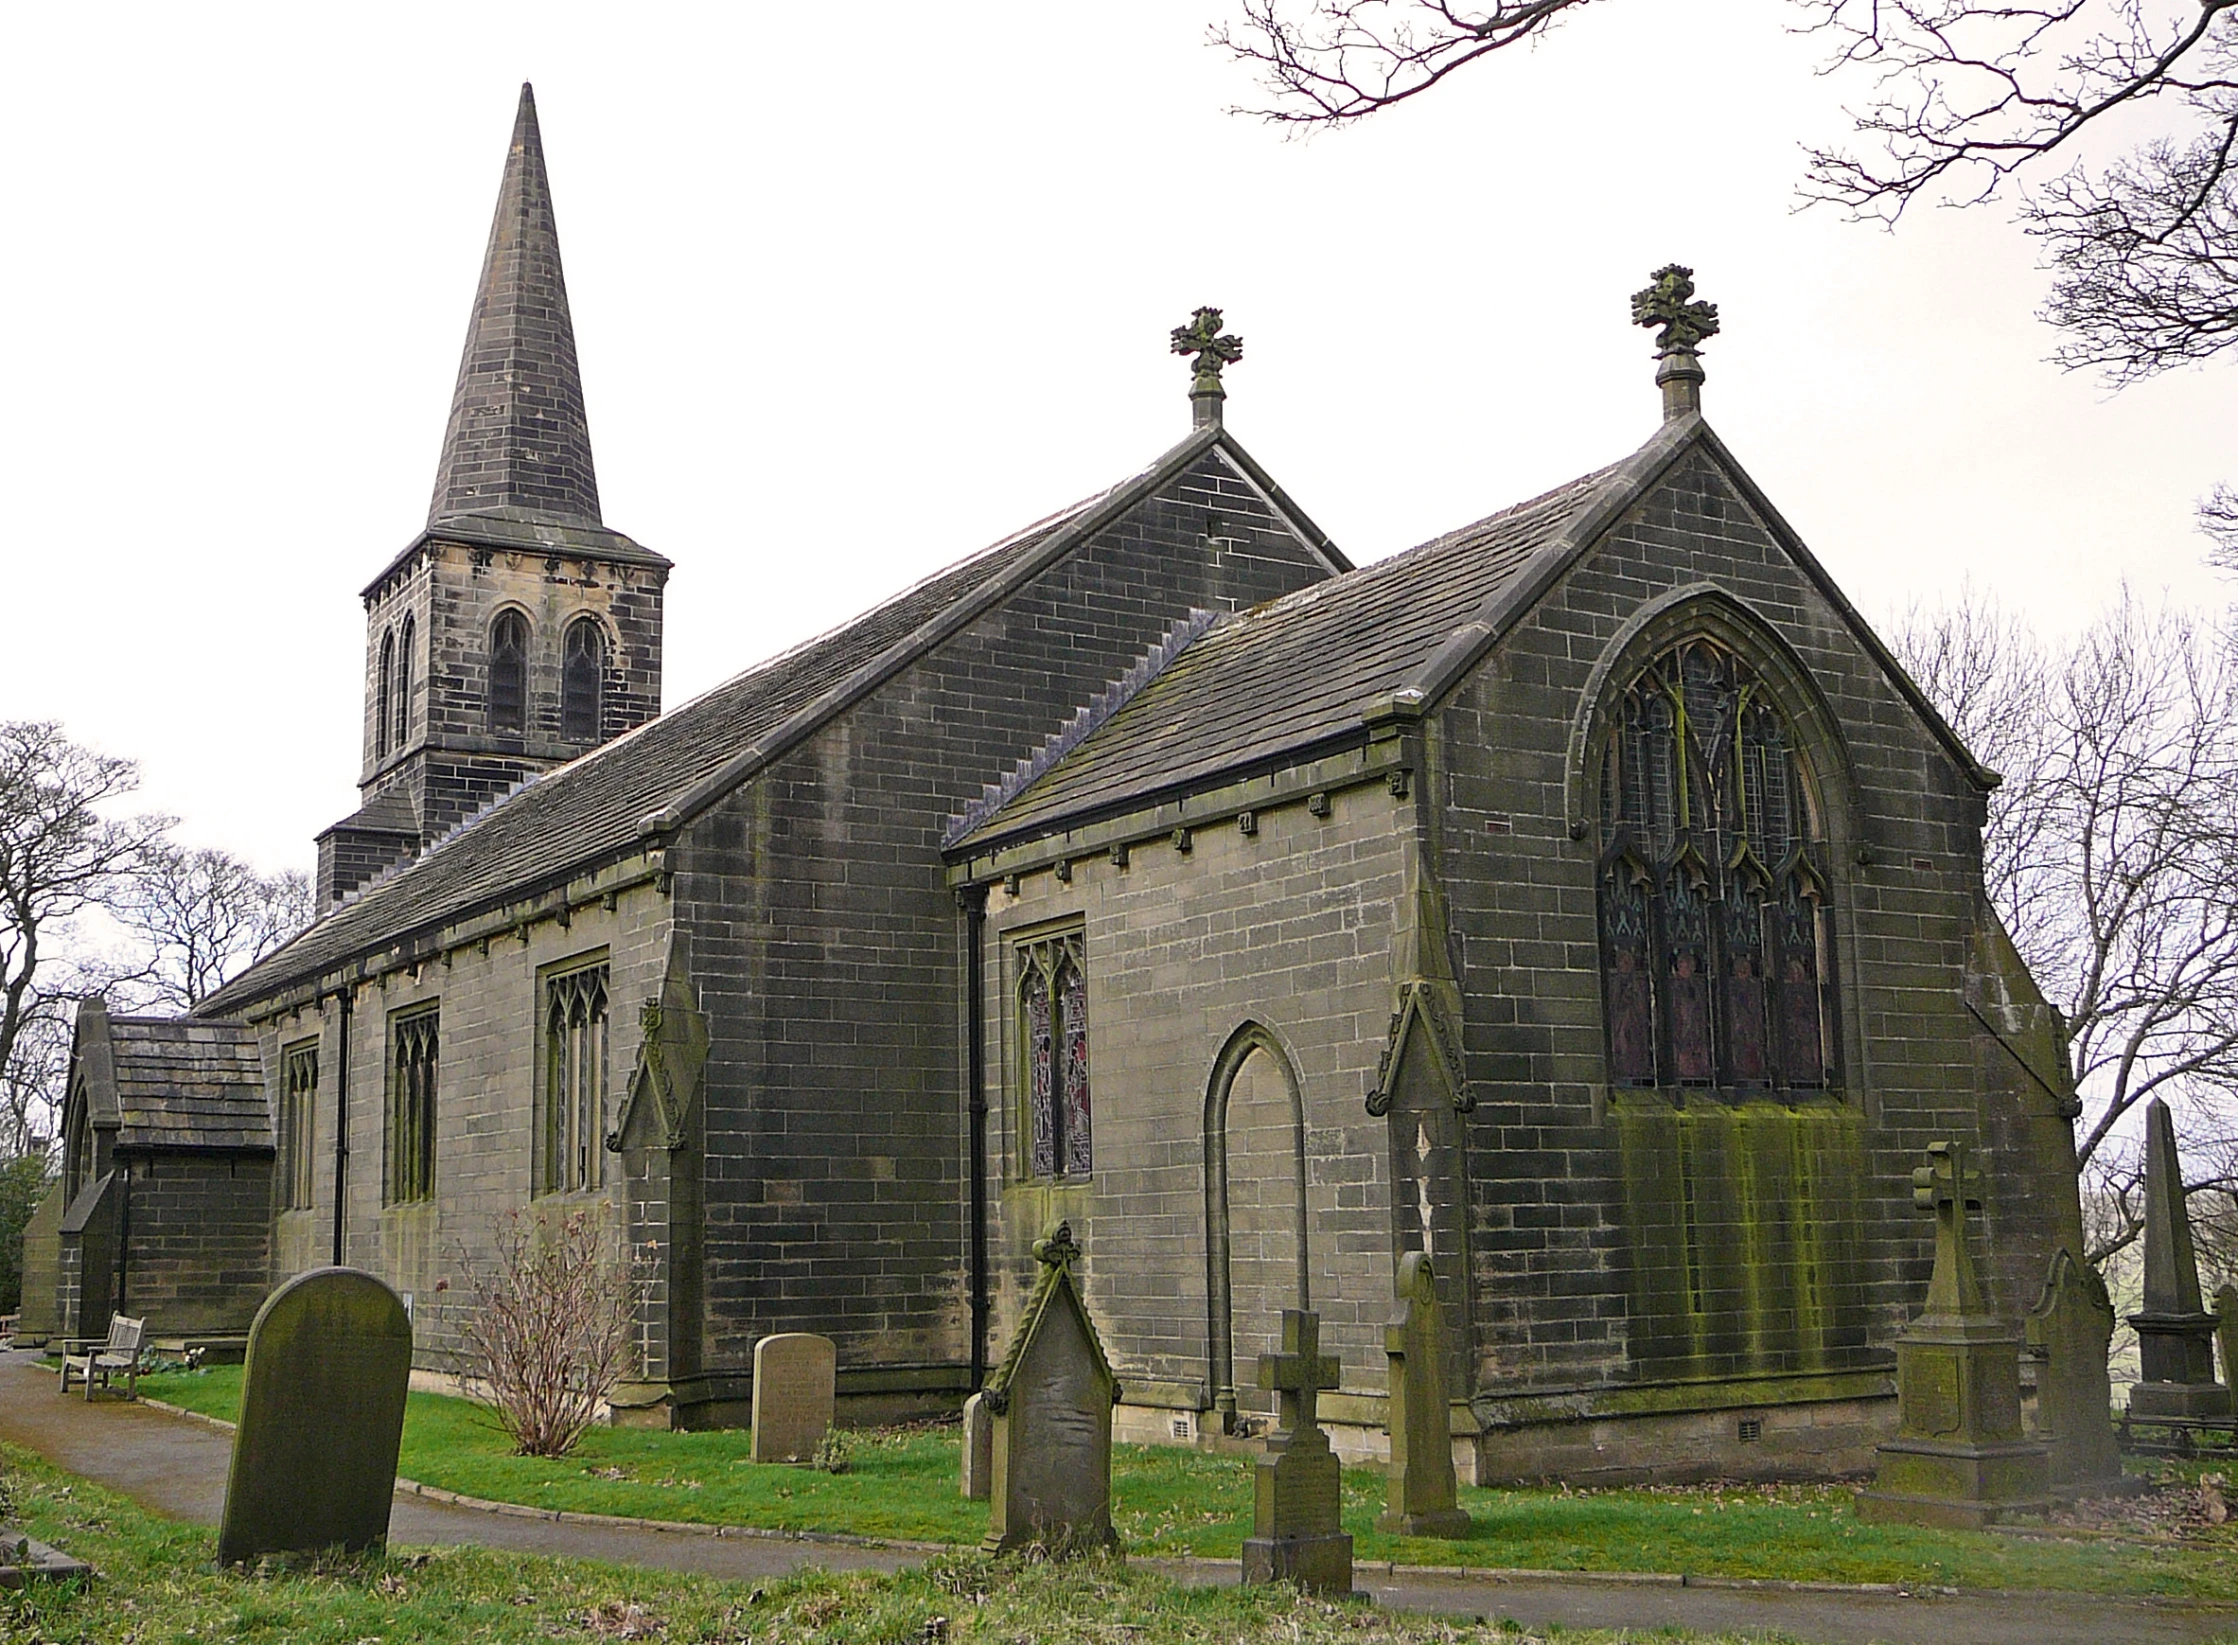 an old stone church with a steeple and graveyard